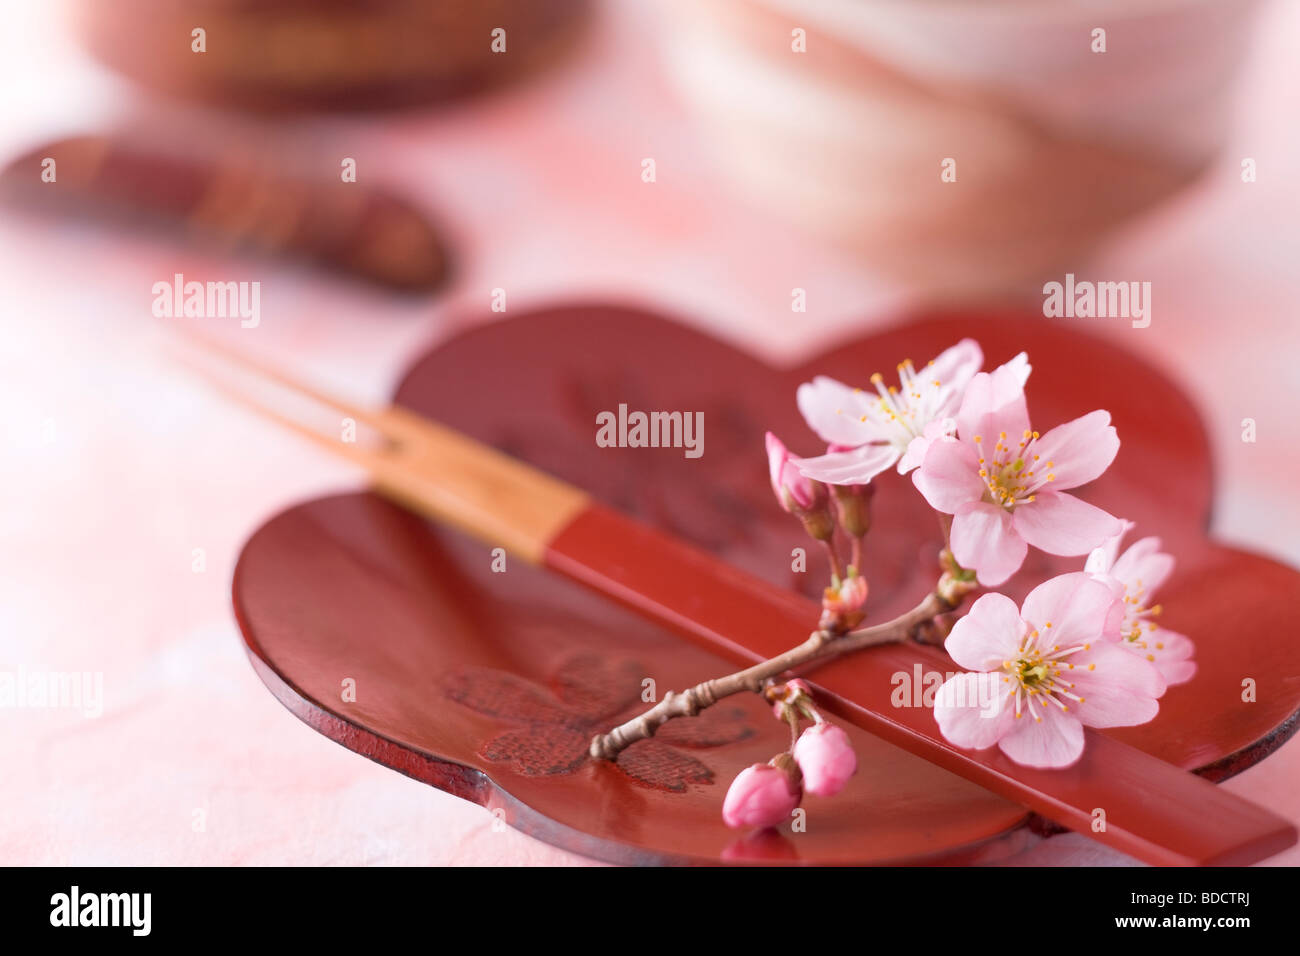 Flower shaped plate and cherry blossoms Stock Photo